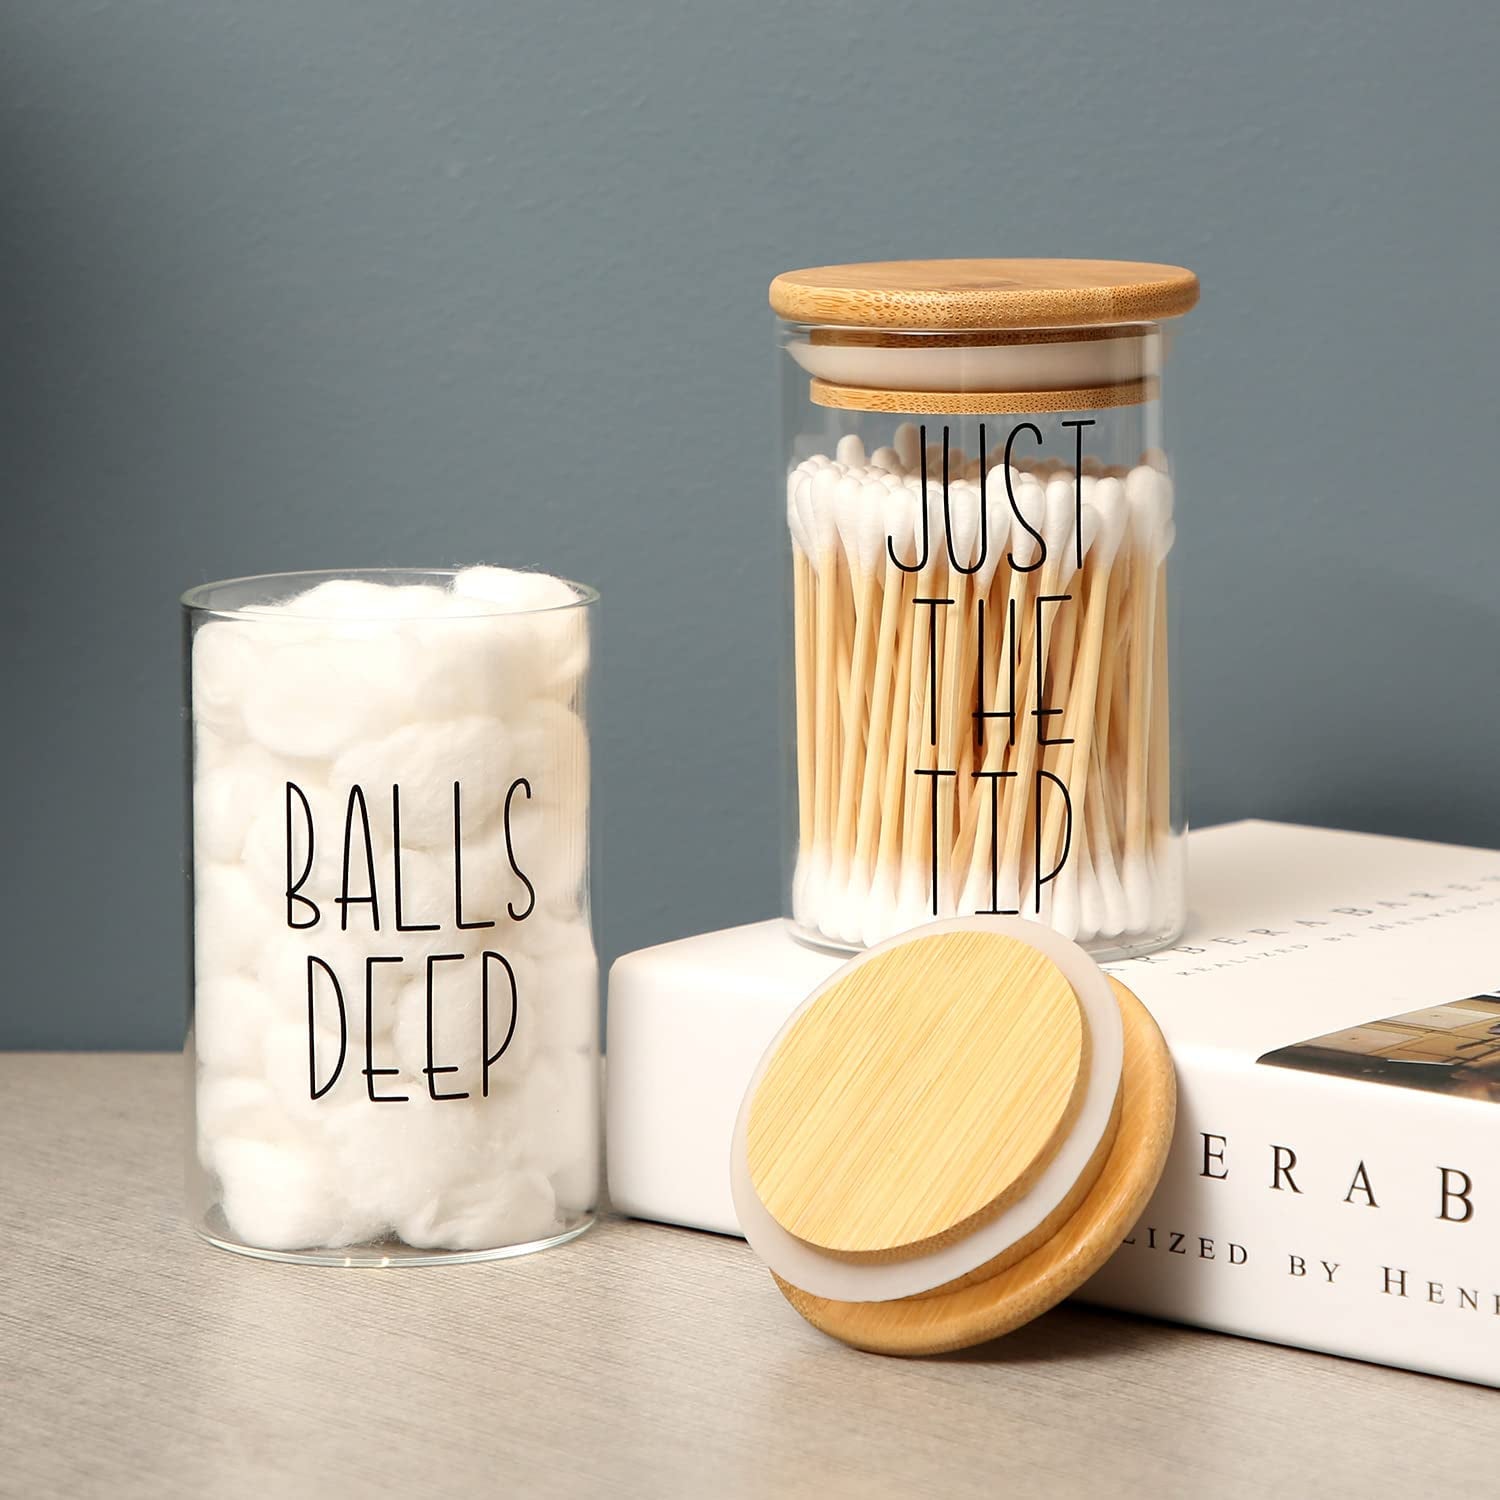 Apothecary Jars with Lids for Bathroom Organization, Qtip Cotton Ball round Holder, and Floss Pick Storage Are Great for Decor. (Set of 4, Pads & Floss)